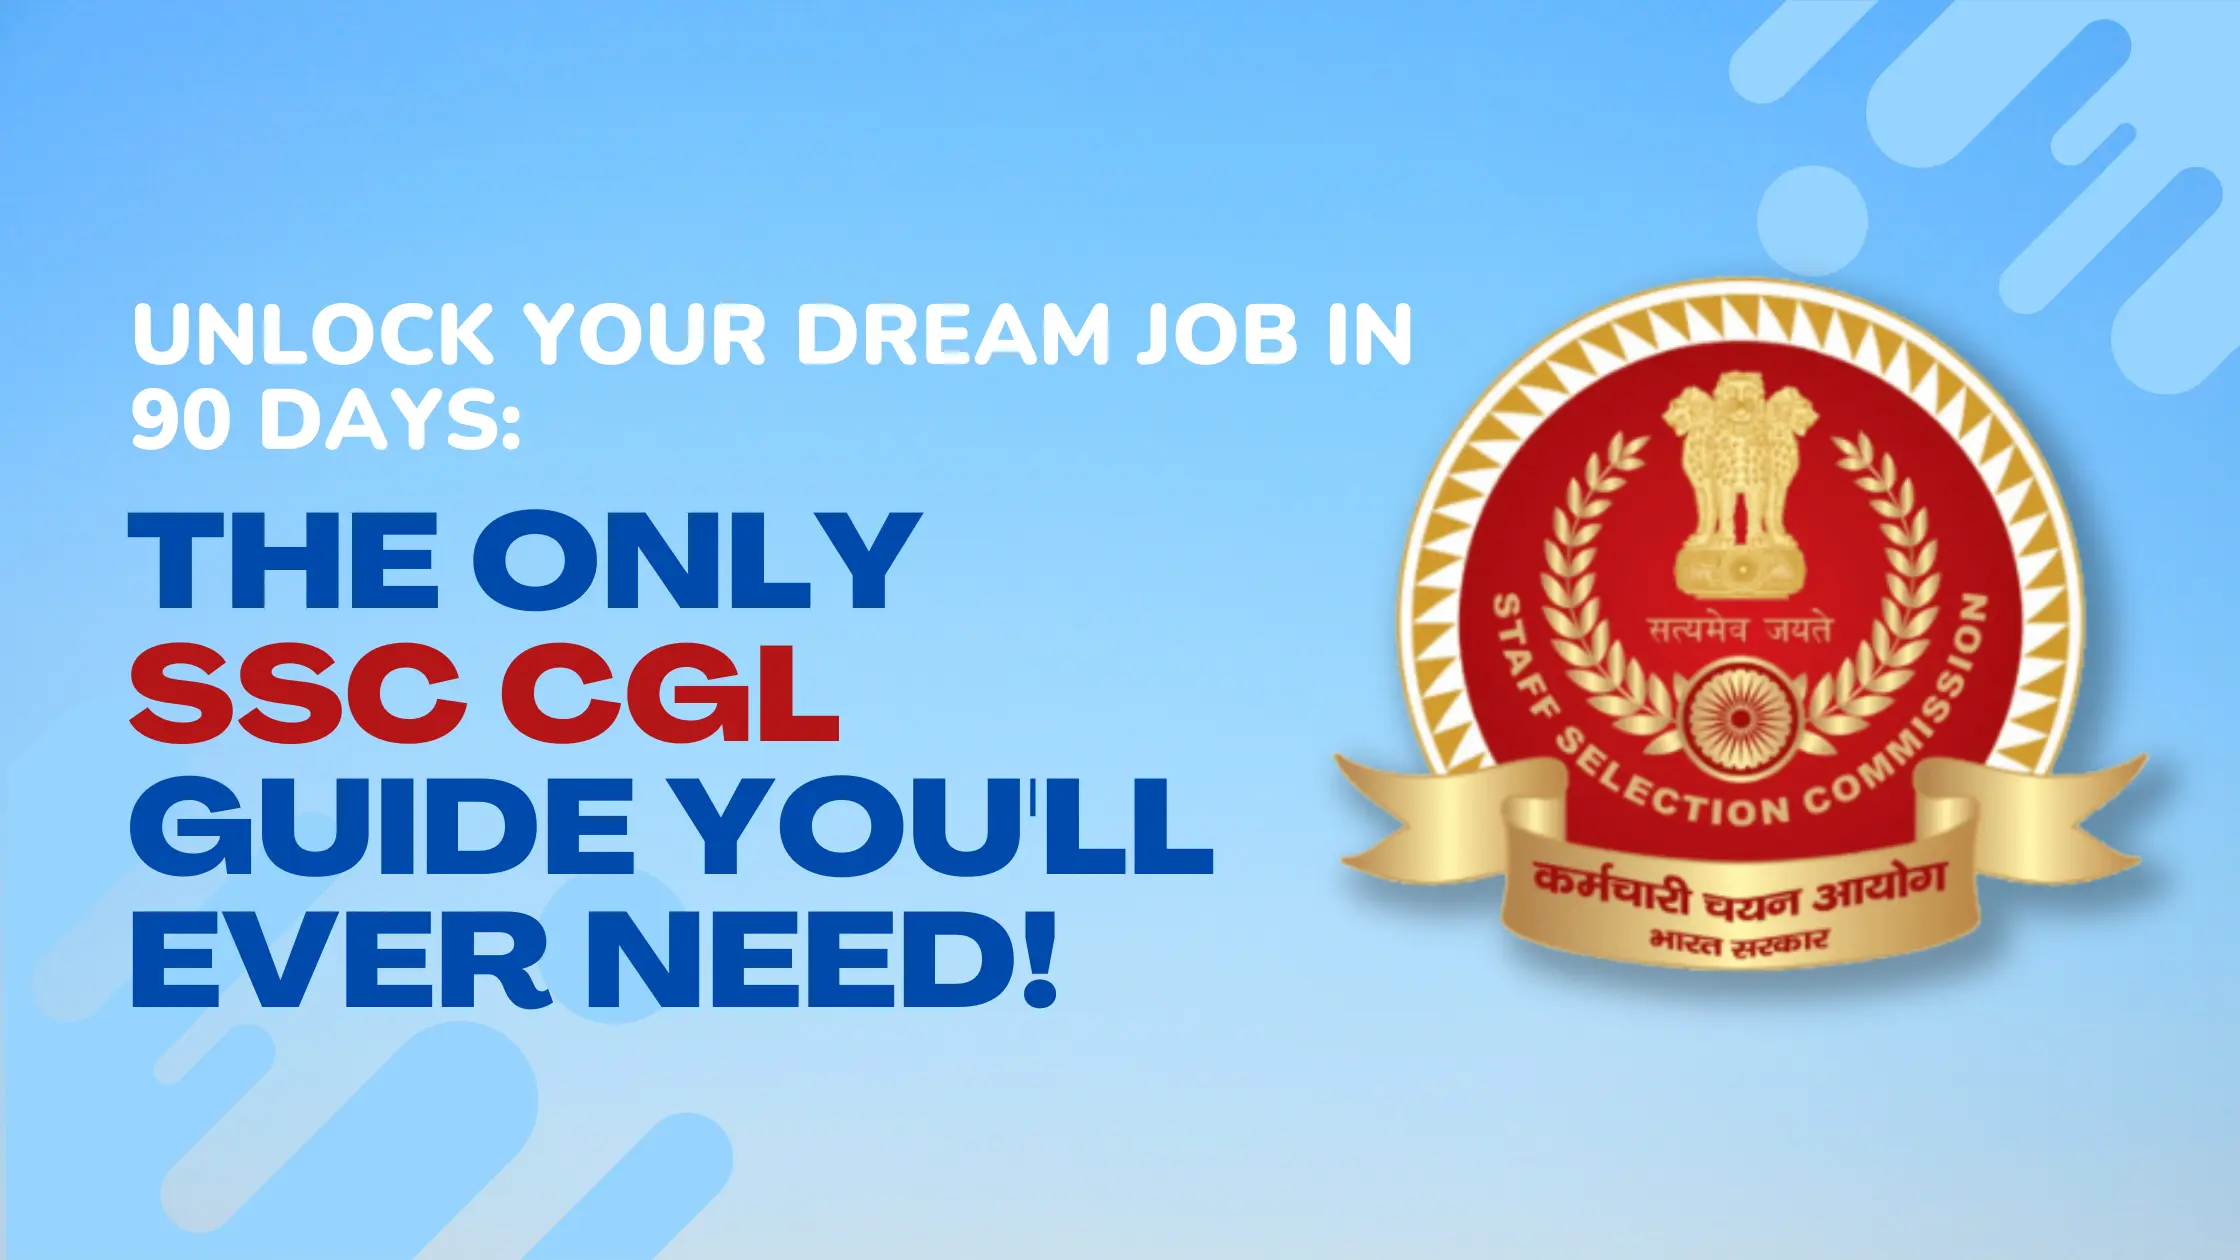 How to Crack SSC CGL in 3 Months | The Only SSC CGL Guide You'll Ever Need!